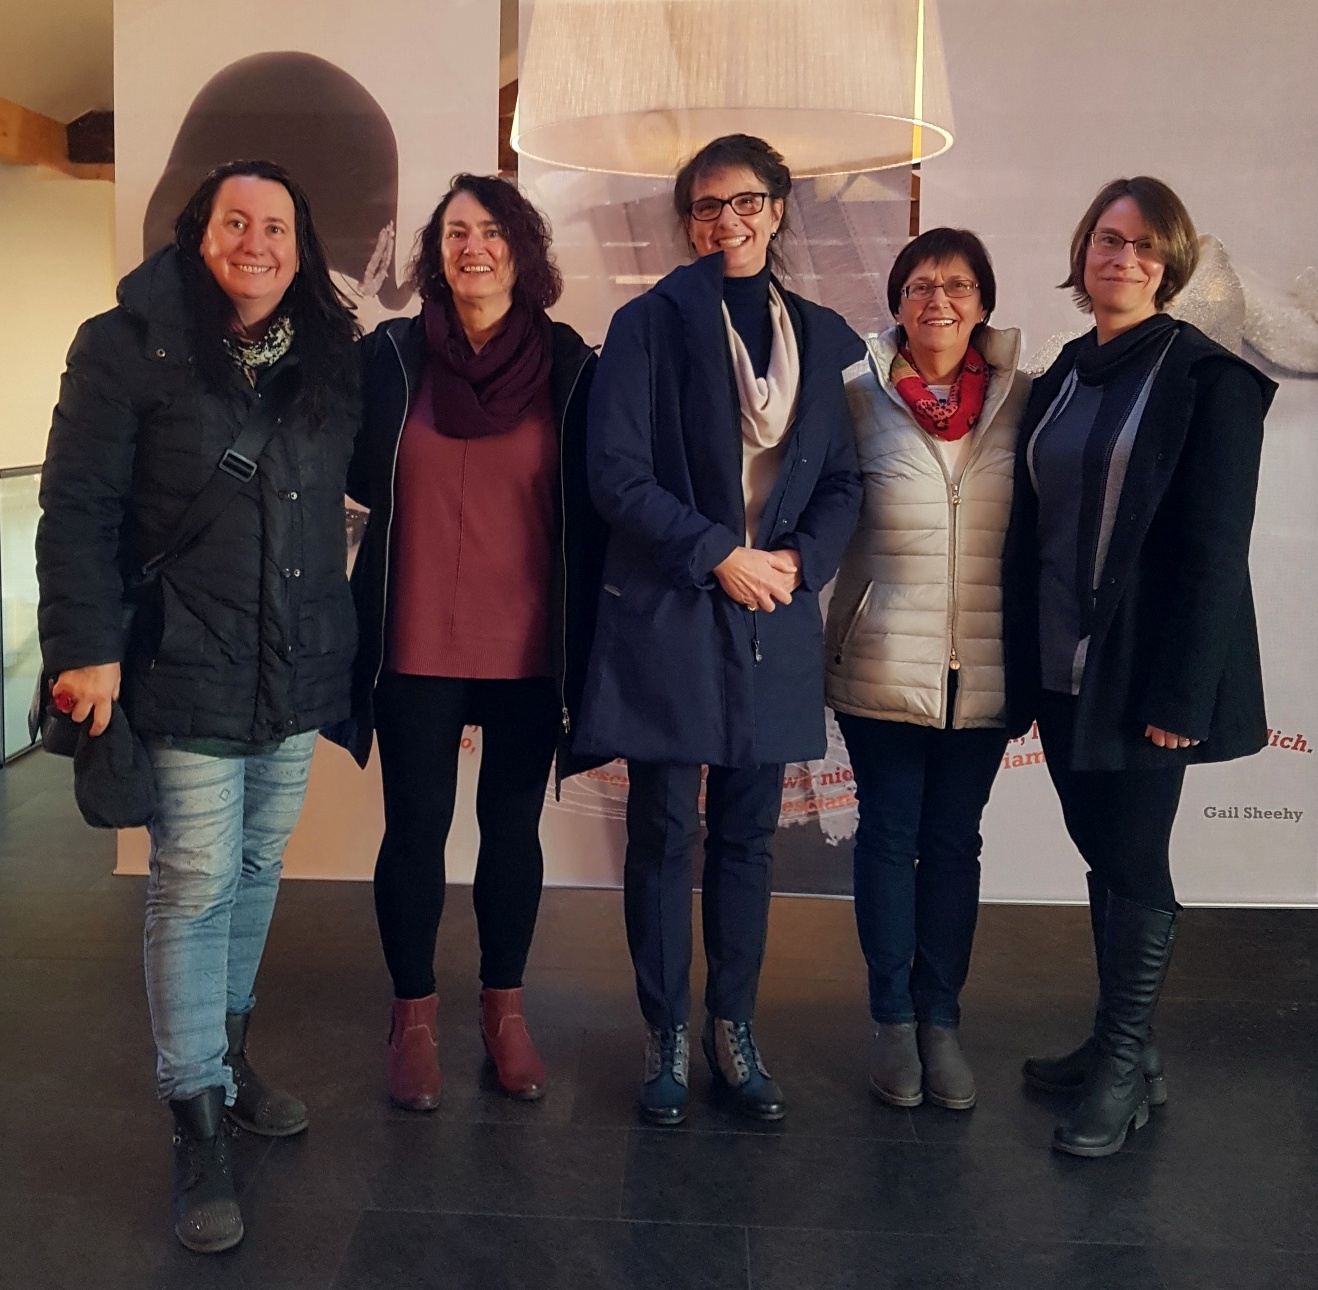 Visiting the Women’s Museum in Meran in 2018: From left to right: Astrid Schönweger, IAWM; Dr. Kathy Sanford, University of Victoria; Dr. Darlene Clover, University of Victoria; Sissi Prader, Women’s Museum Meran; and Dr. Nancy Taber, University Brock;